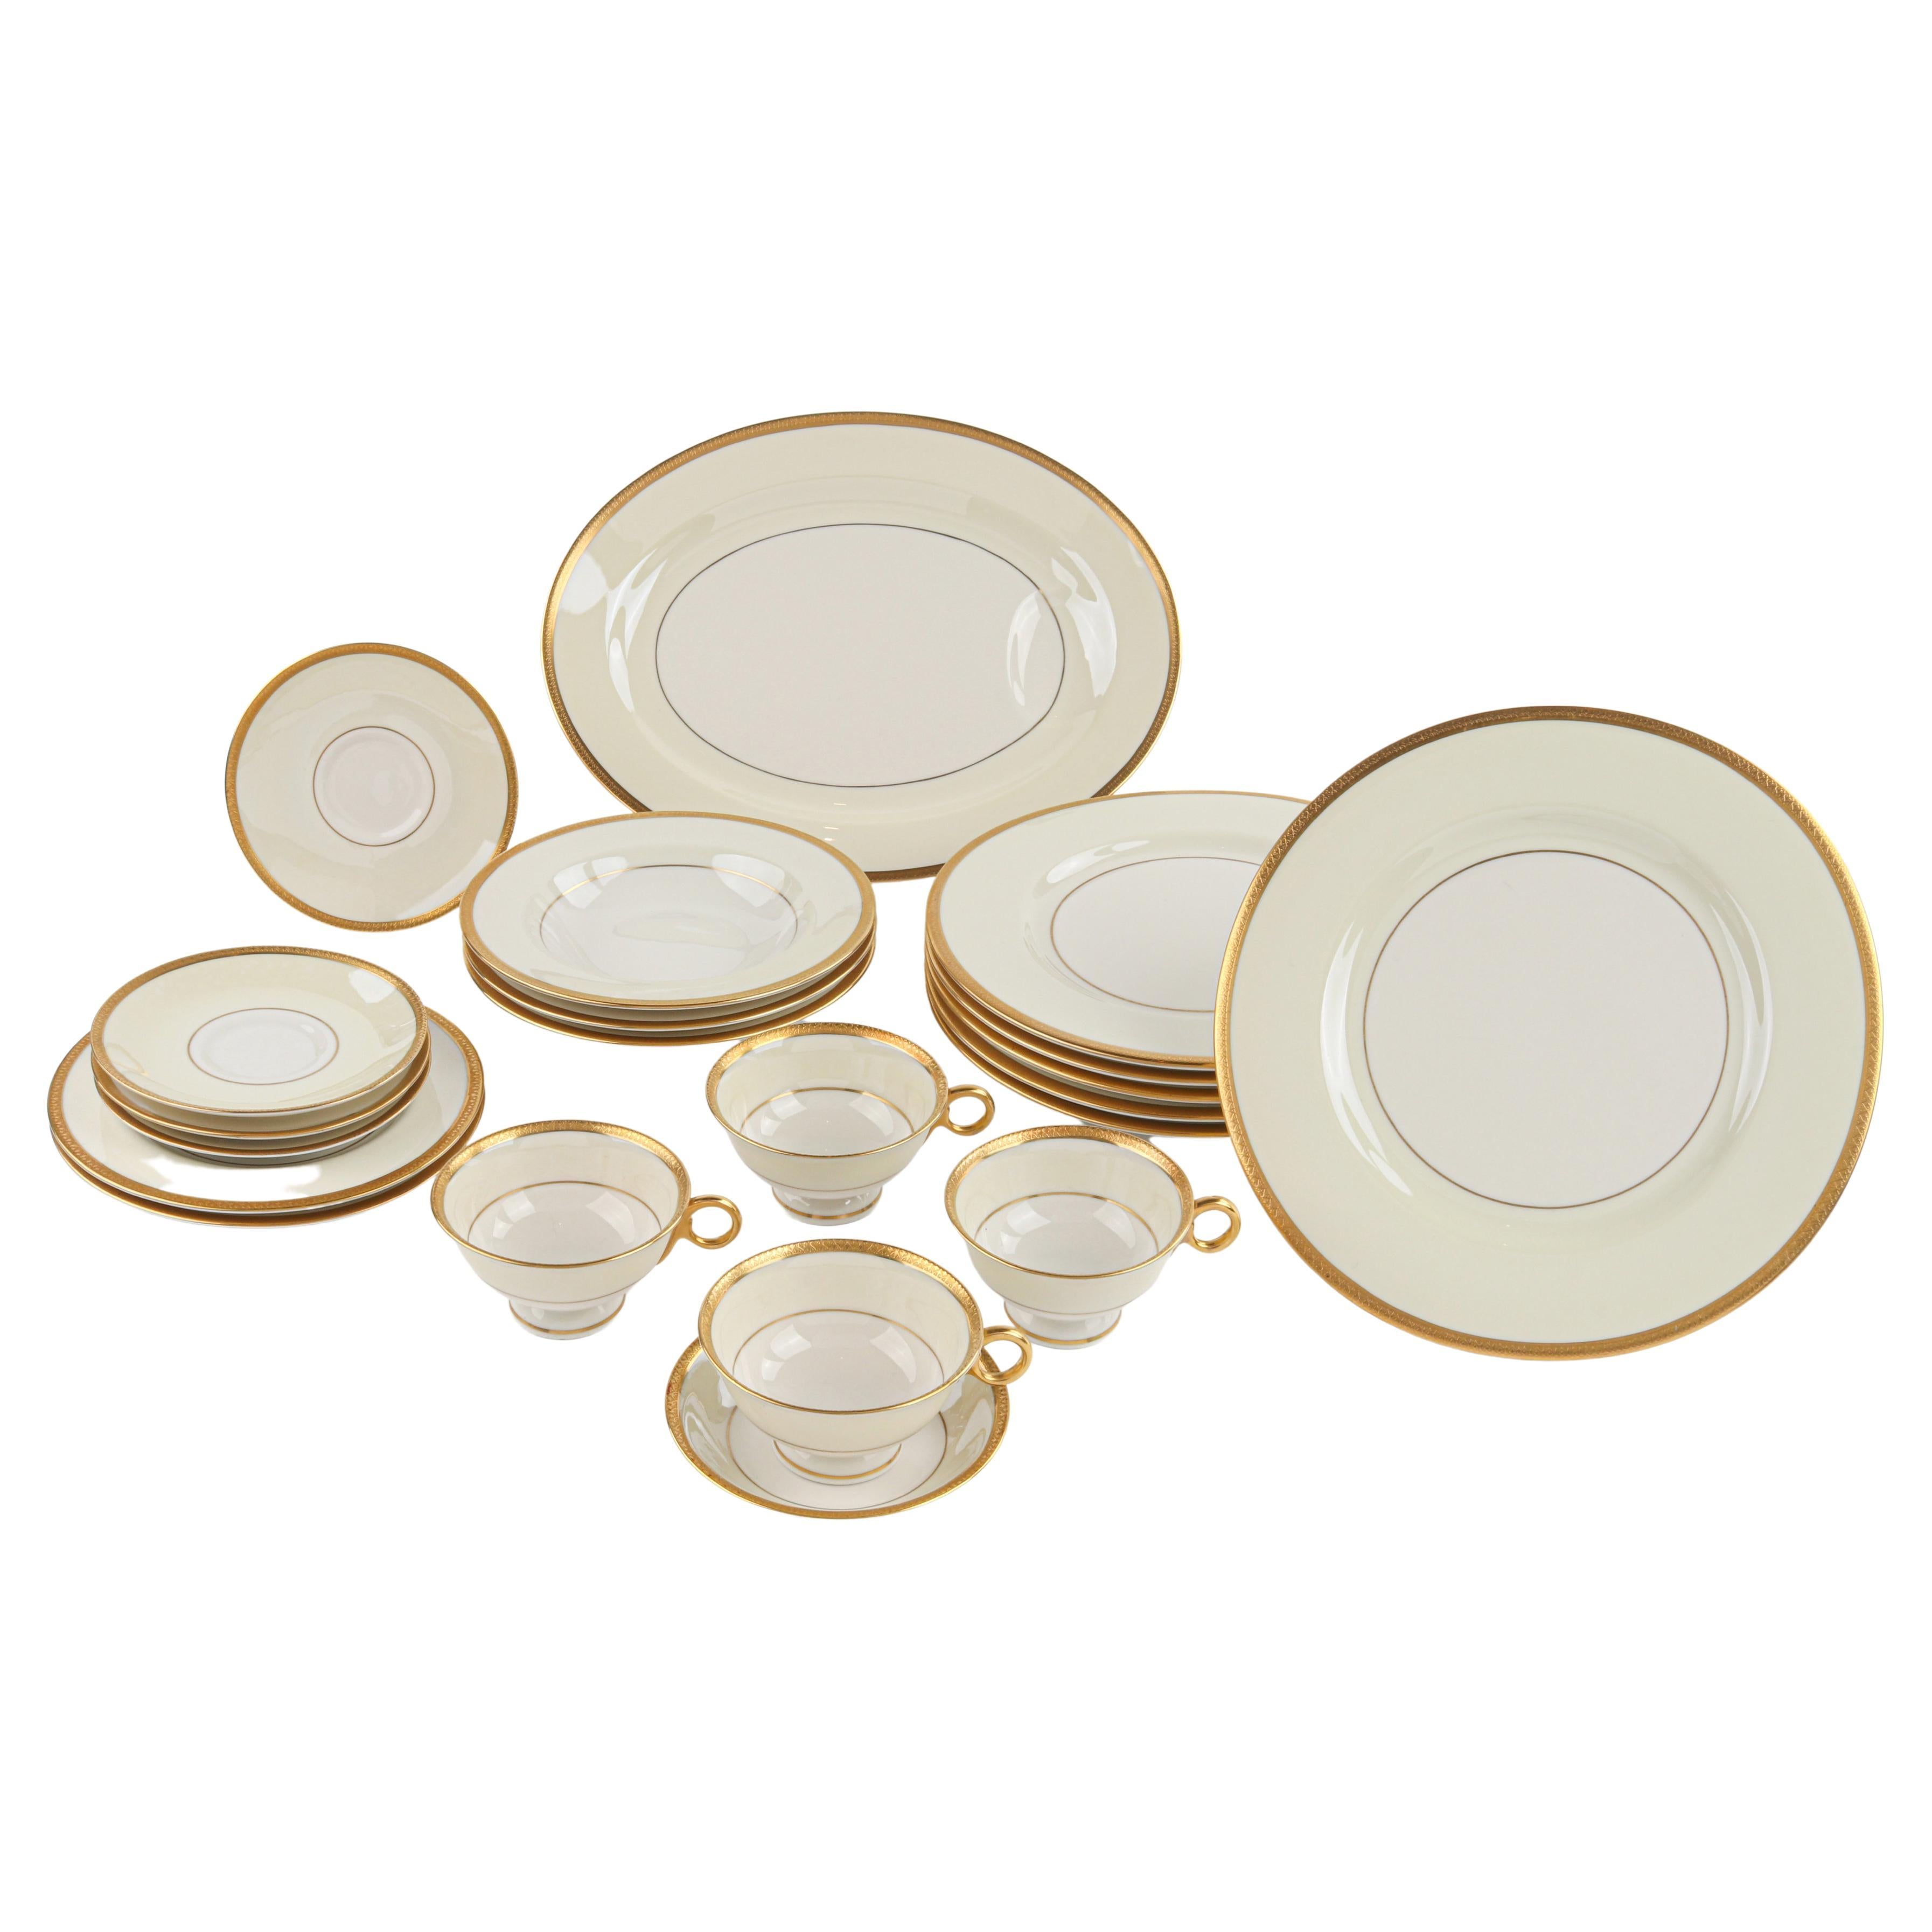 What is the most durable kind of dinnerware?